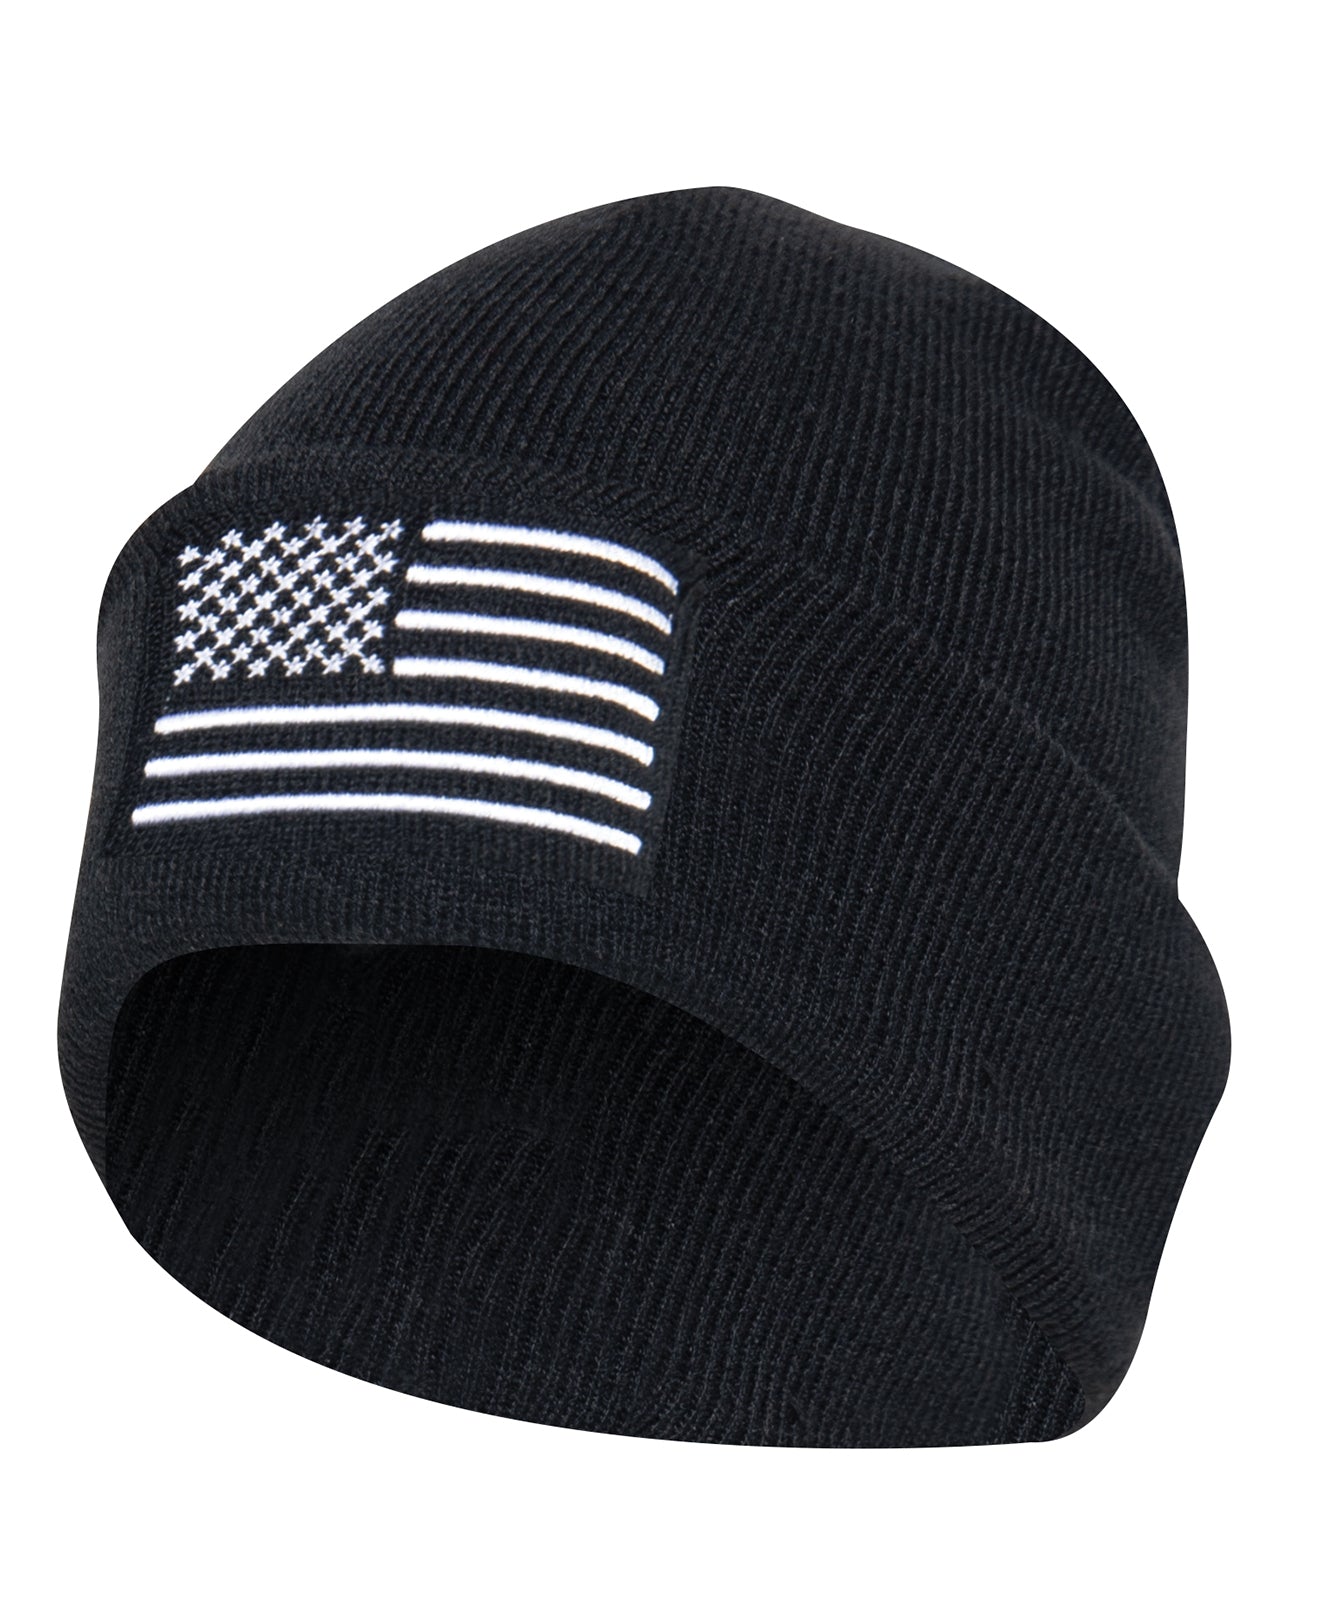 Men's US Flag Embroidered Fine Knit 100% Acrylic Watch Cap